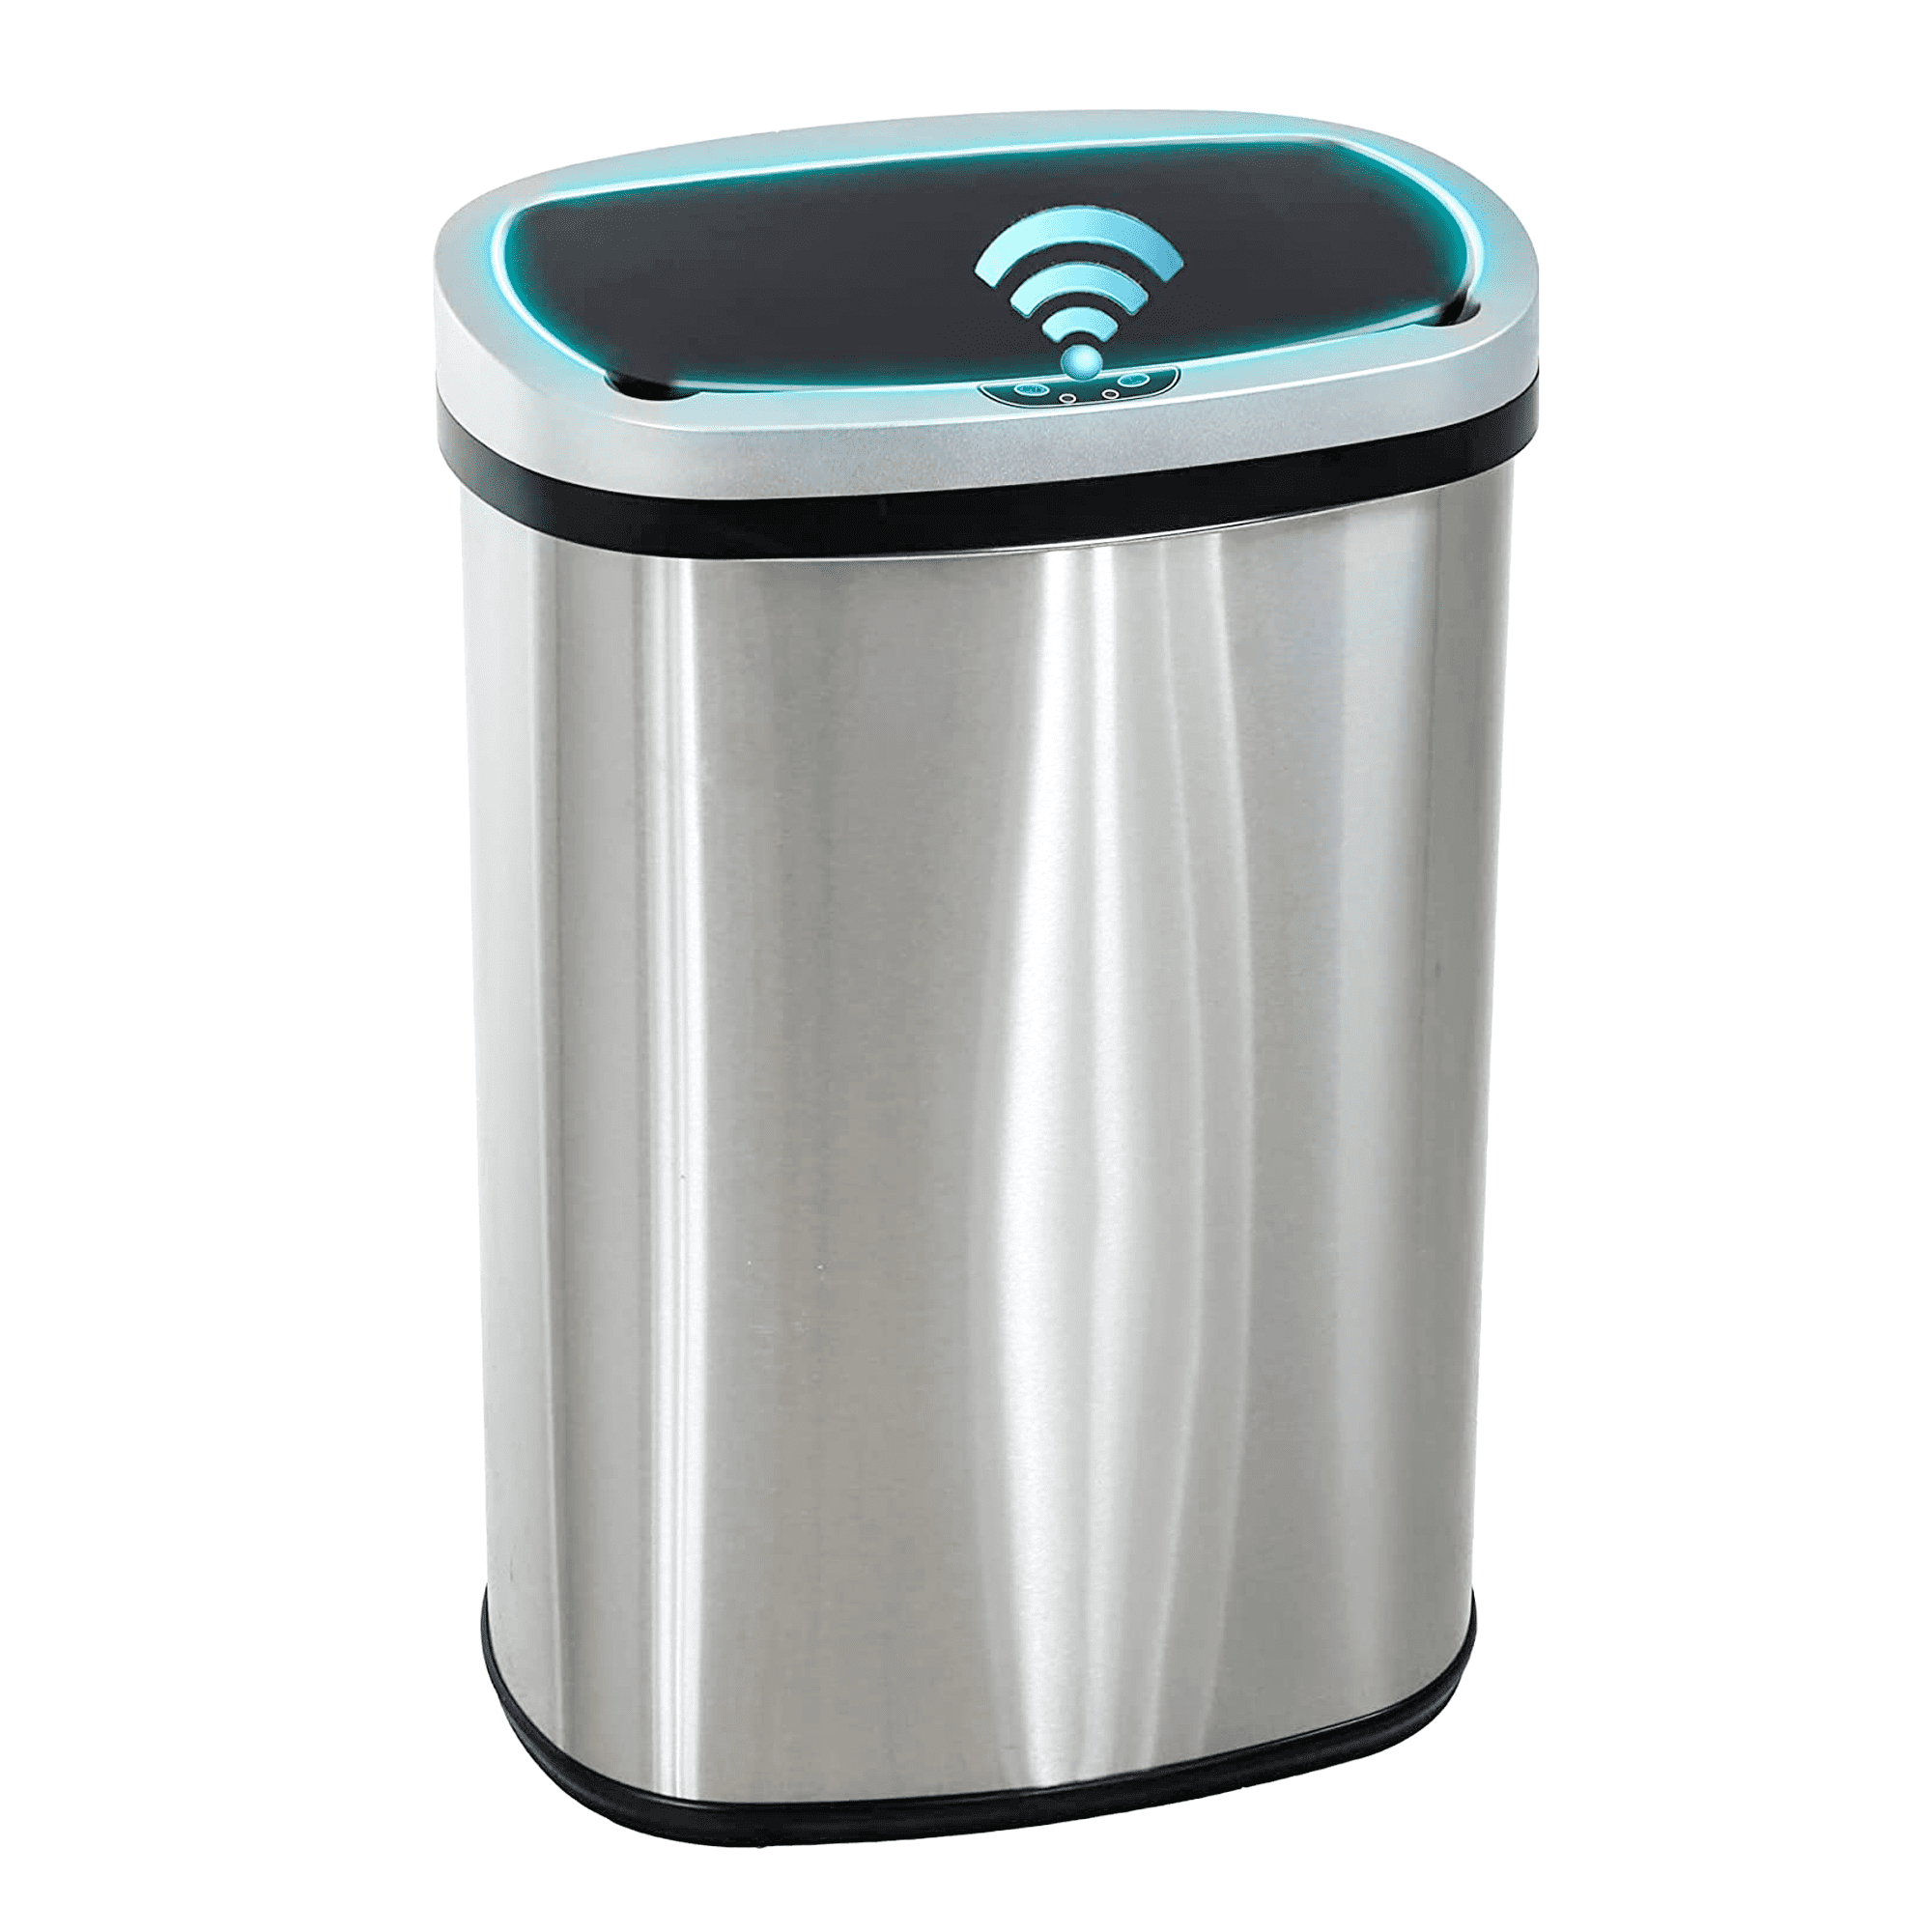  BIQWBIC 50L/13Gal Automatic Trash Can for Home and